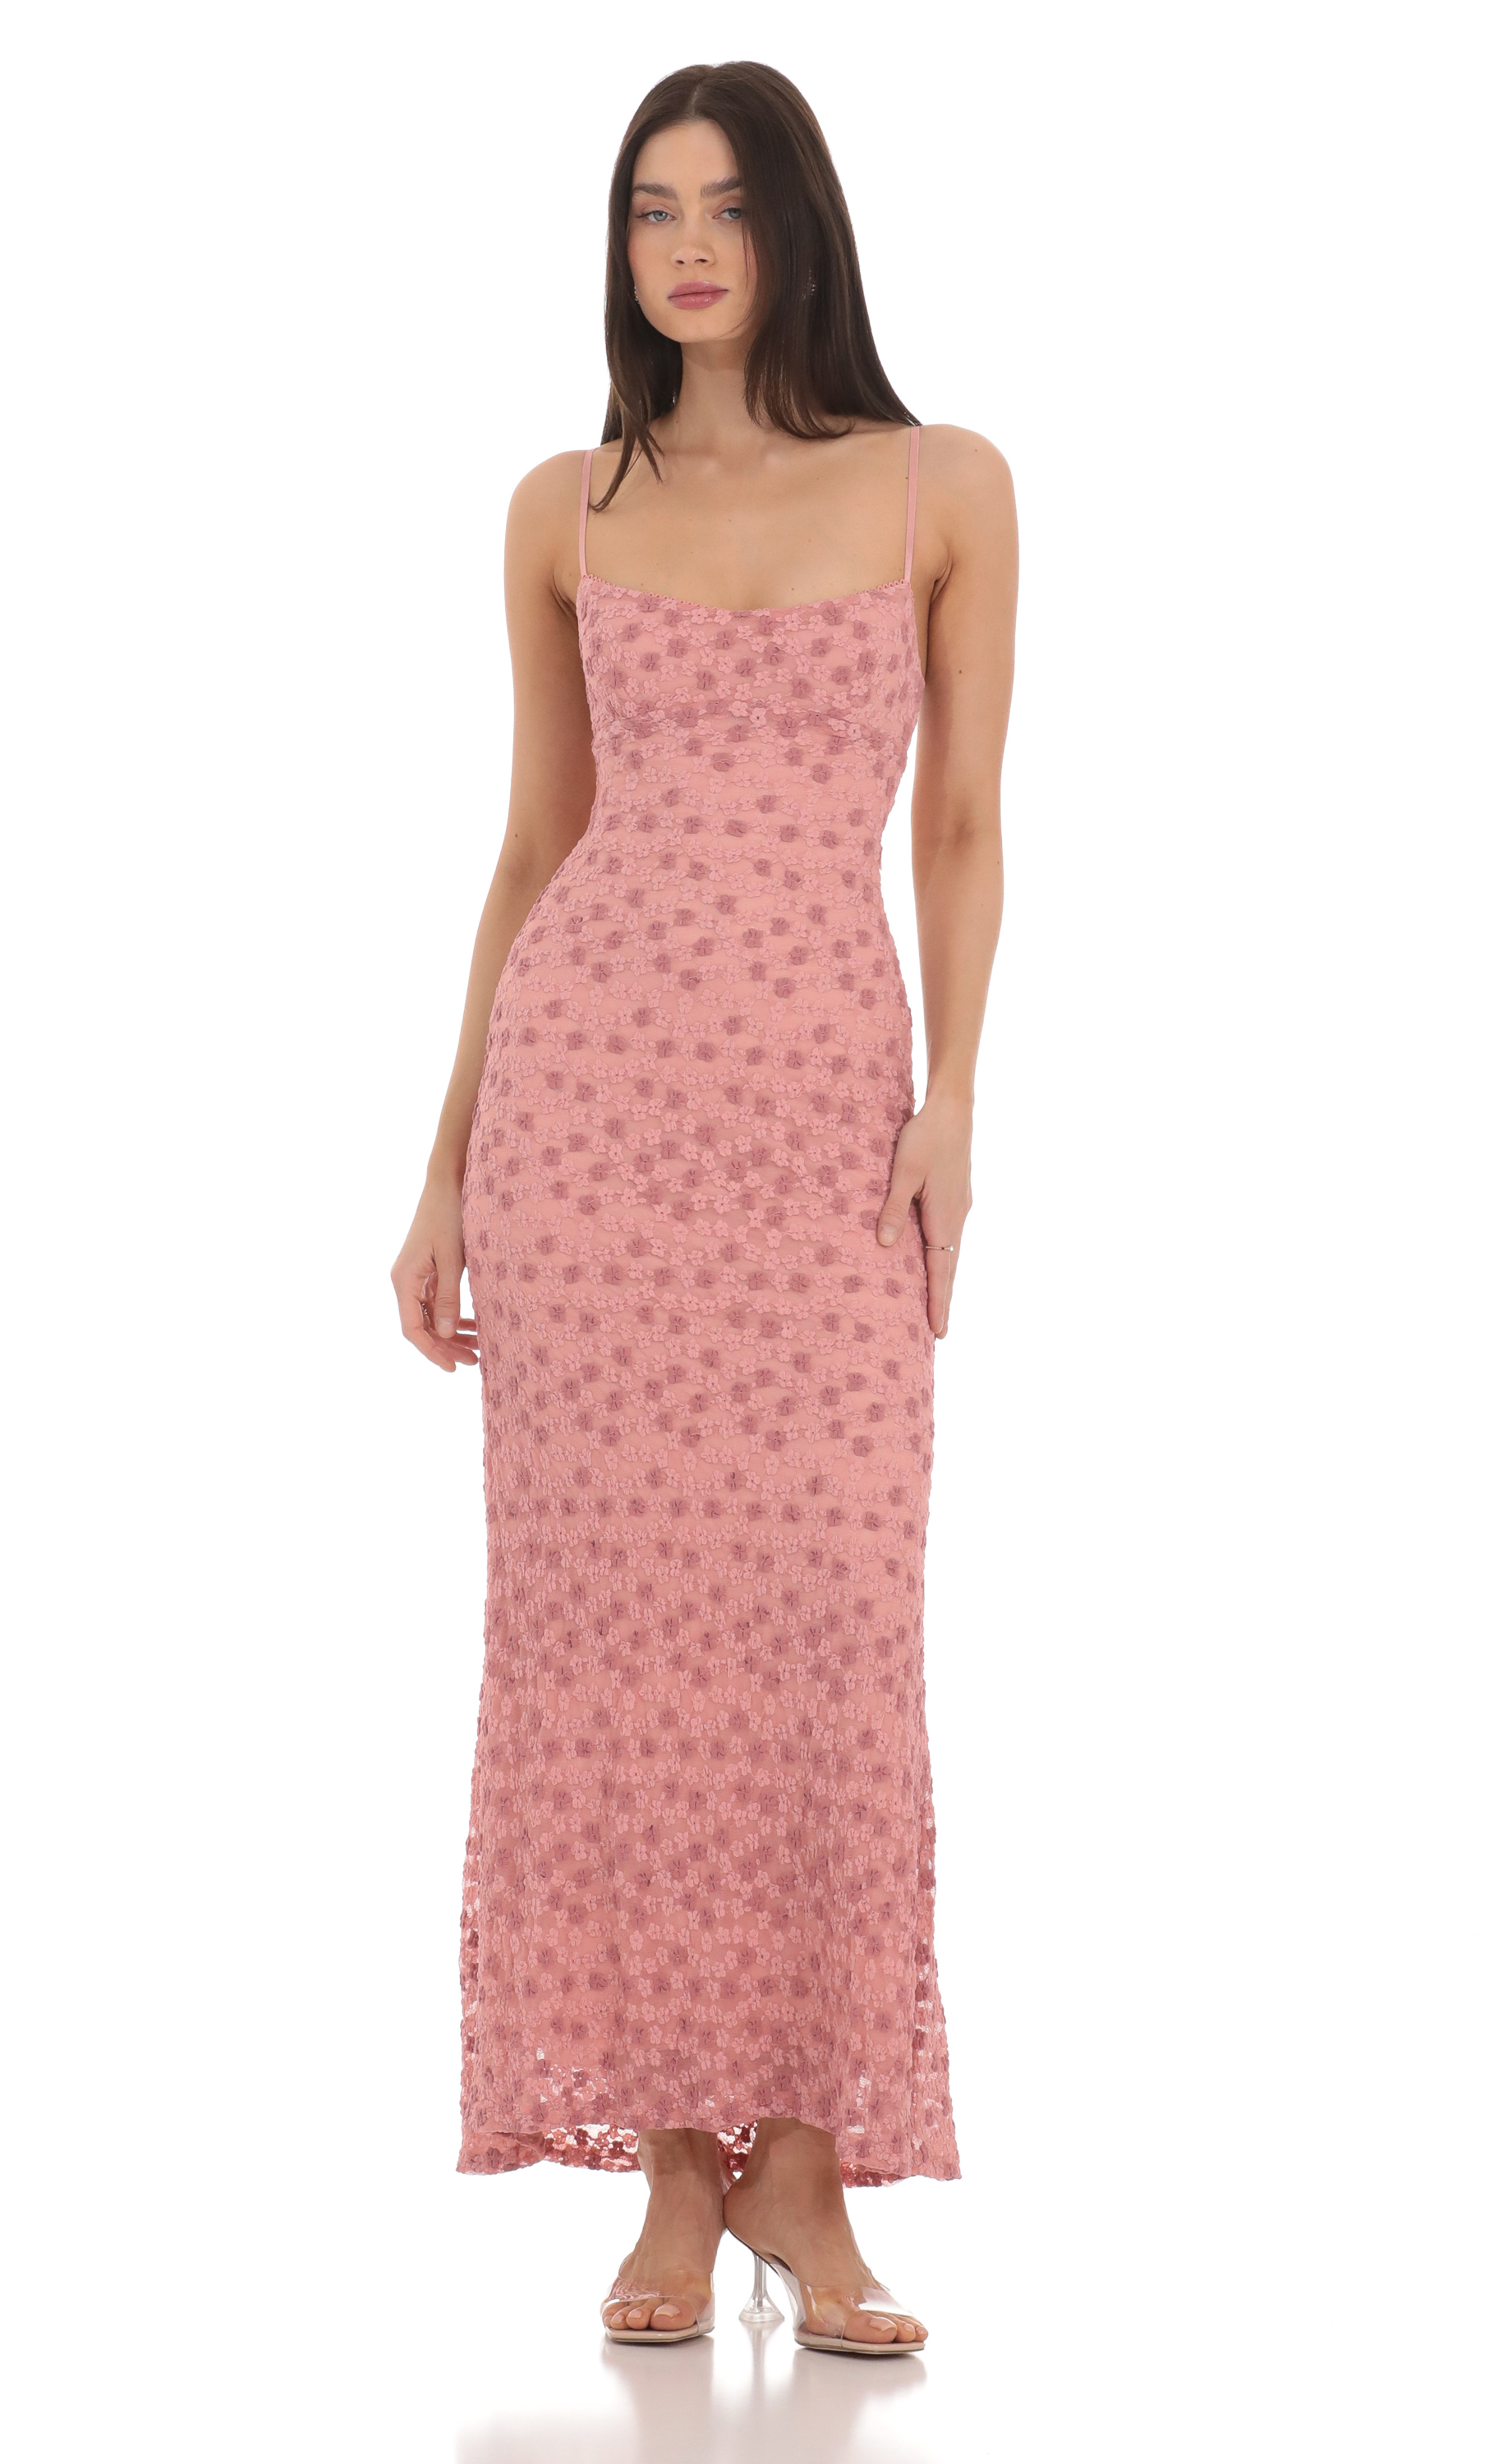 Textured Floral Maxi Dress in Pink